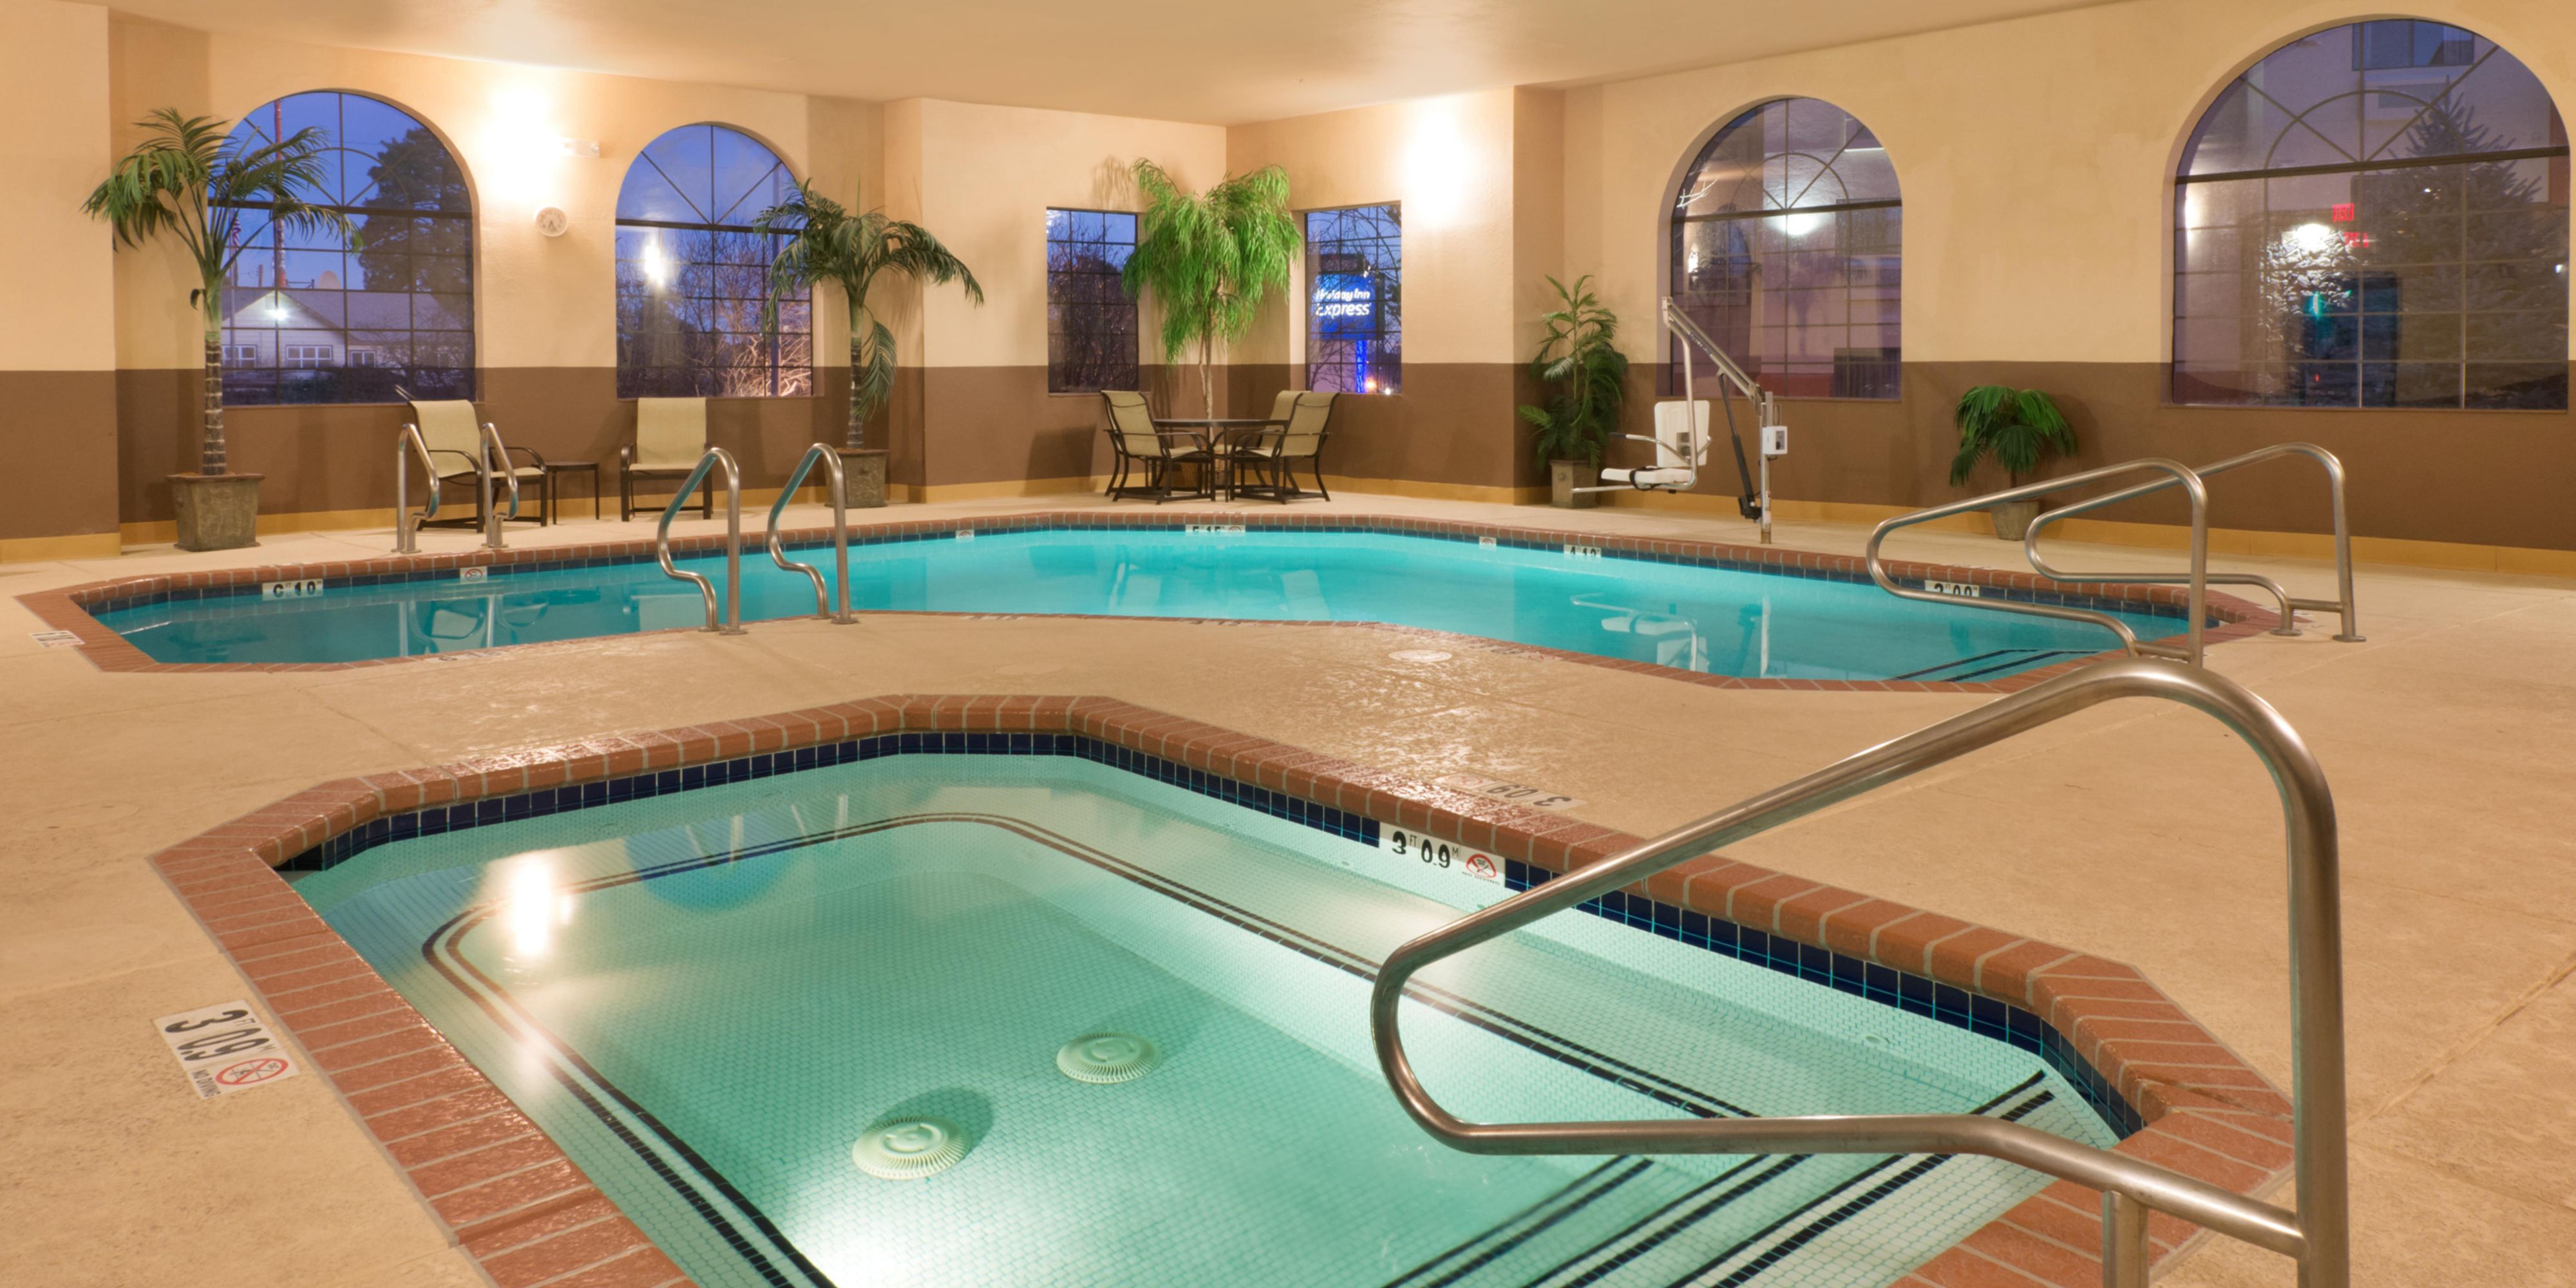 Relax by the pool at the Holiday Inn Express Show Low. Our pool area is indoor which allows for the perfect pool experience regardless of weather or season. Book now and start unwinding poolside!